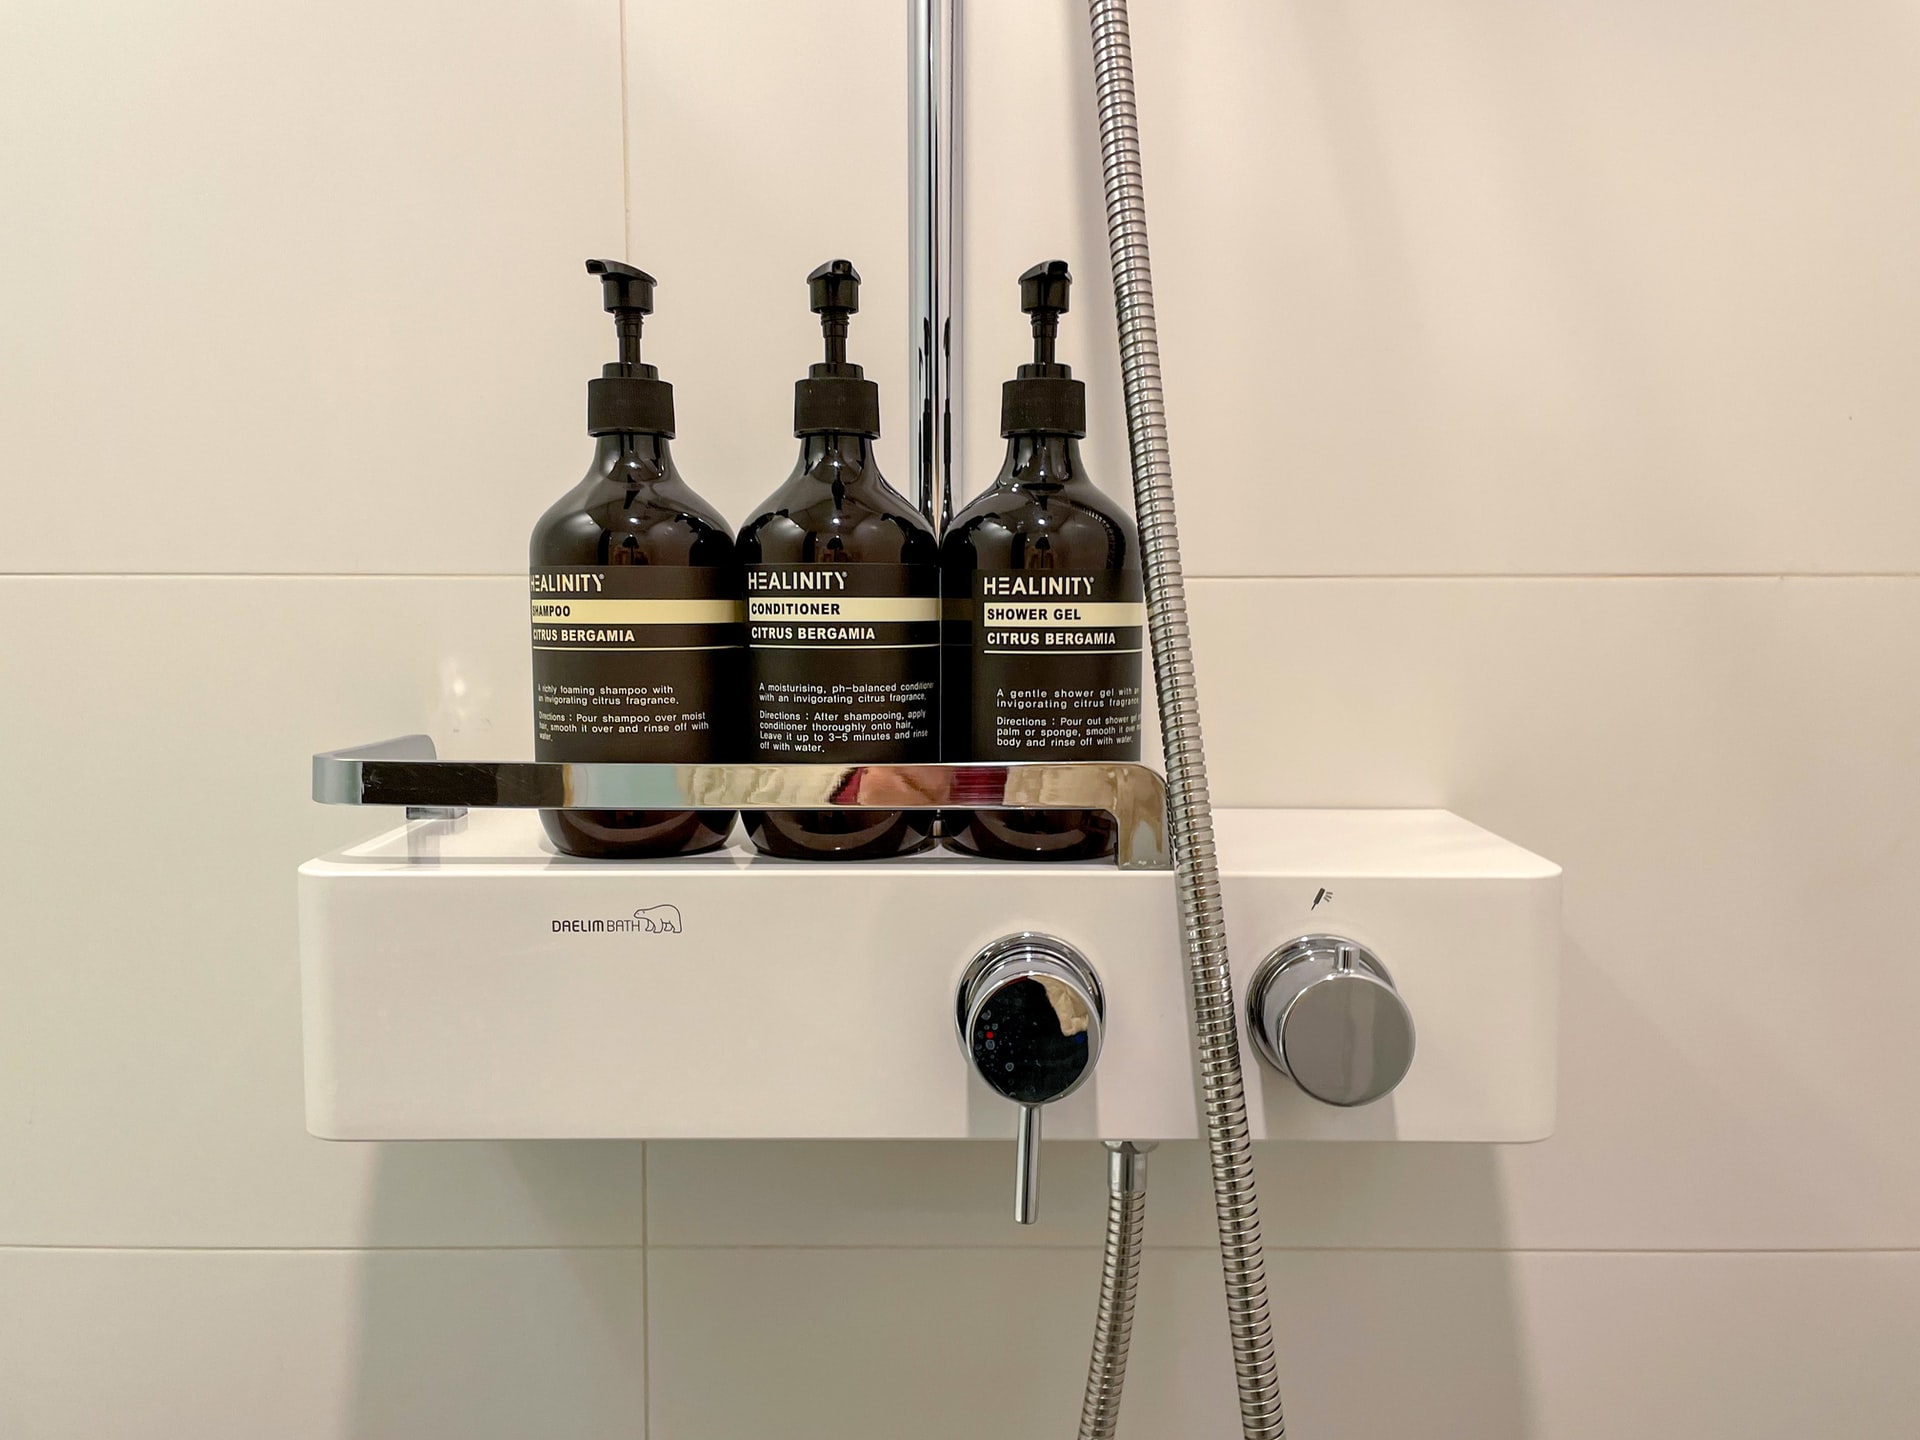 An image of men's hair care products in washroom